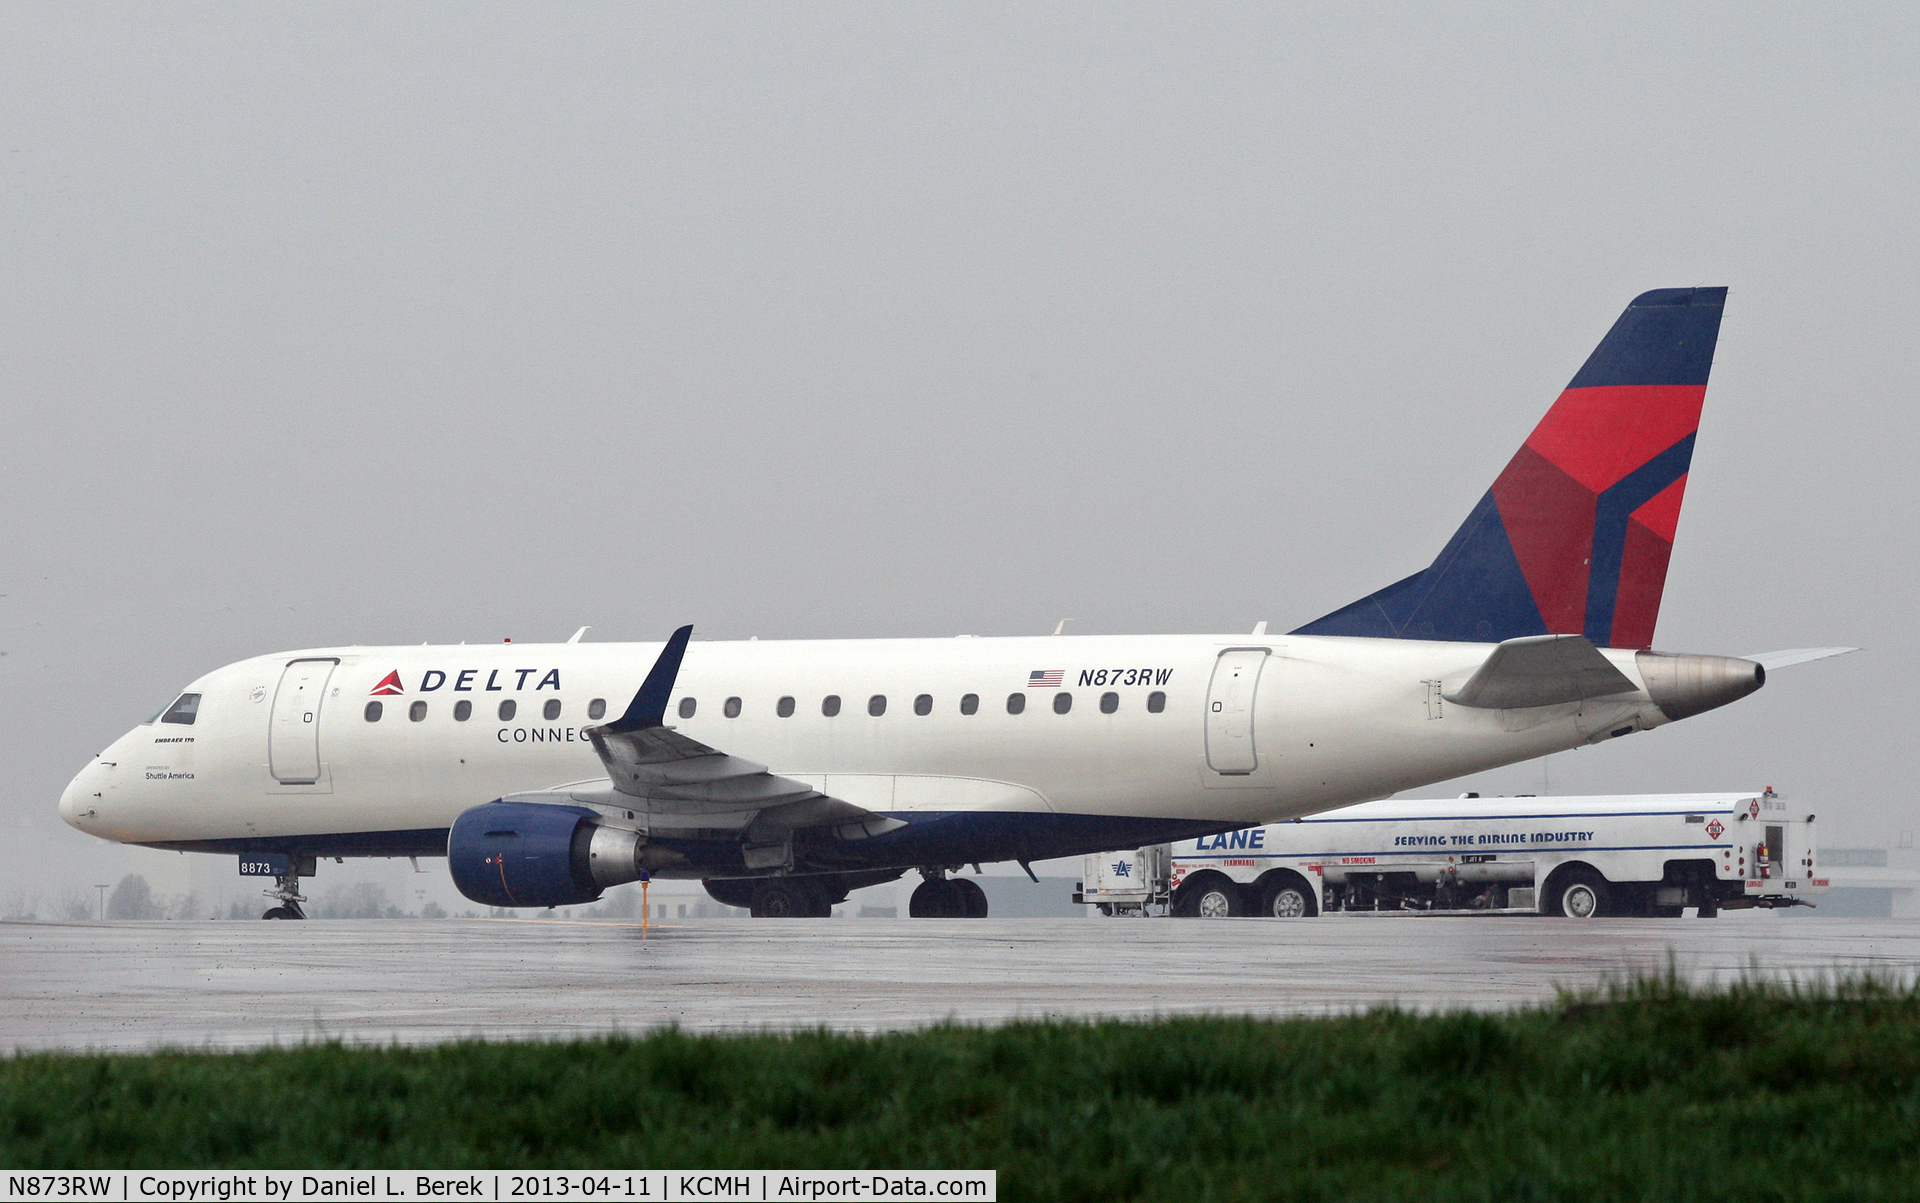 N873RW, 2006 Embraer 170SU (ERJ-170-100SU) C/N 17000144, Formerly in Midwest colors, this regional jet now serves Delta Connection.  She sits out a rain storm on a remote stand at Port Columbus International.